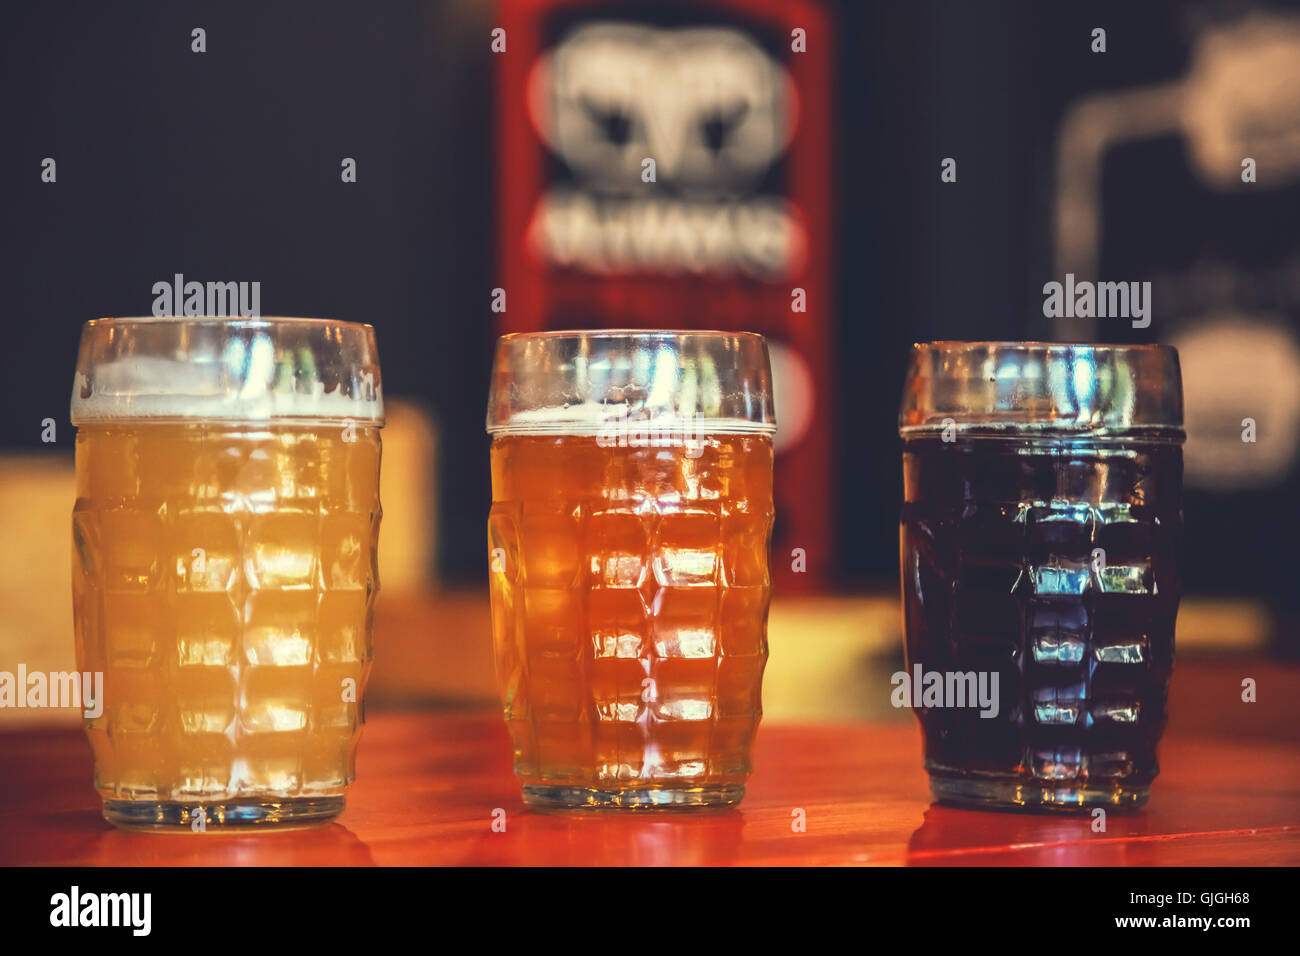 A pint glass of Peroni beer on a bar in a pub Stock Photo - Alamy